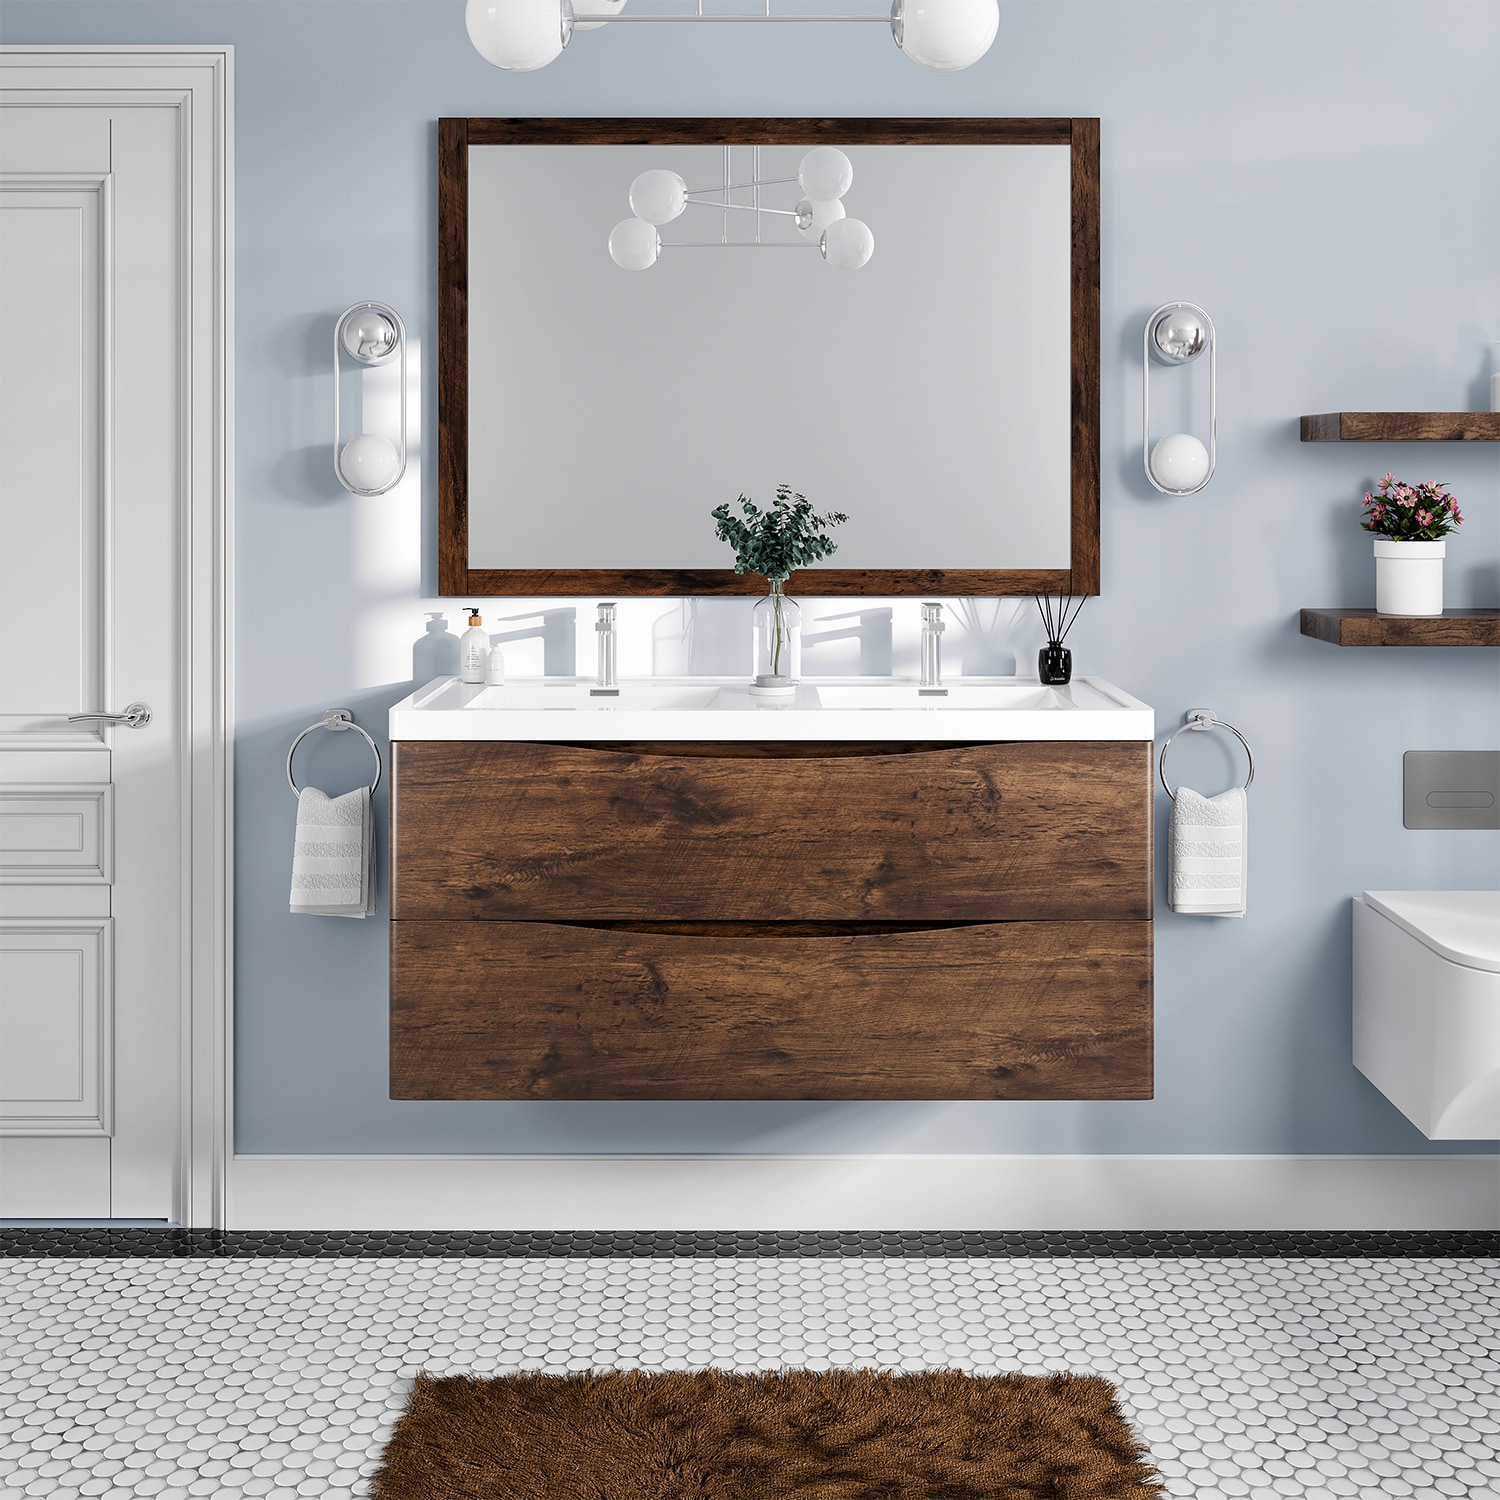 Eviva The Eviva Smiley modern bathroom vanity with integrated white acrylic sink is one of the best pieces Eviva has to offer Featuring soft closing -  EVVN12-DS-48RSWD-WMN